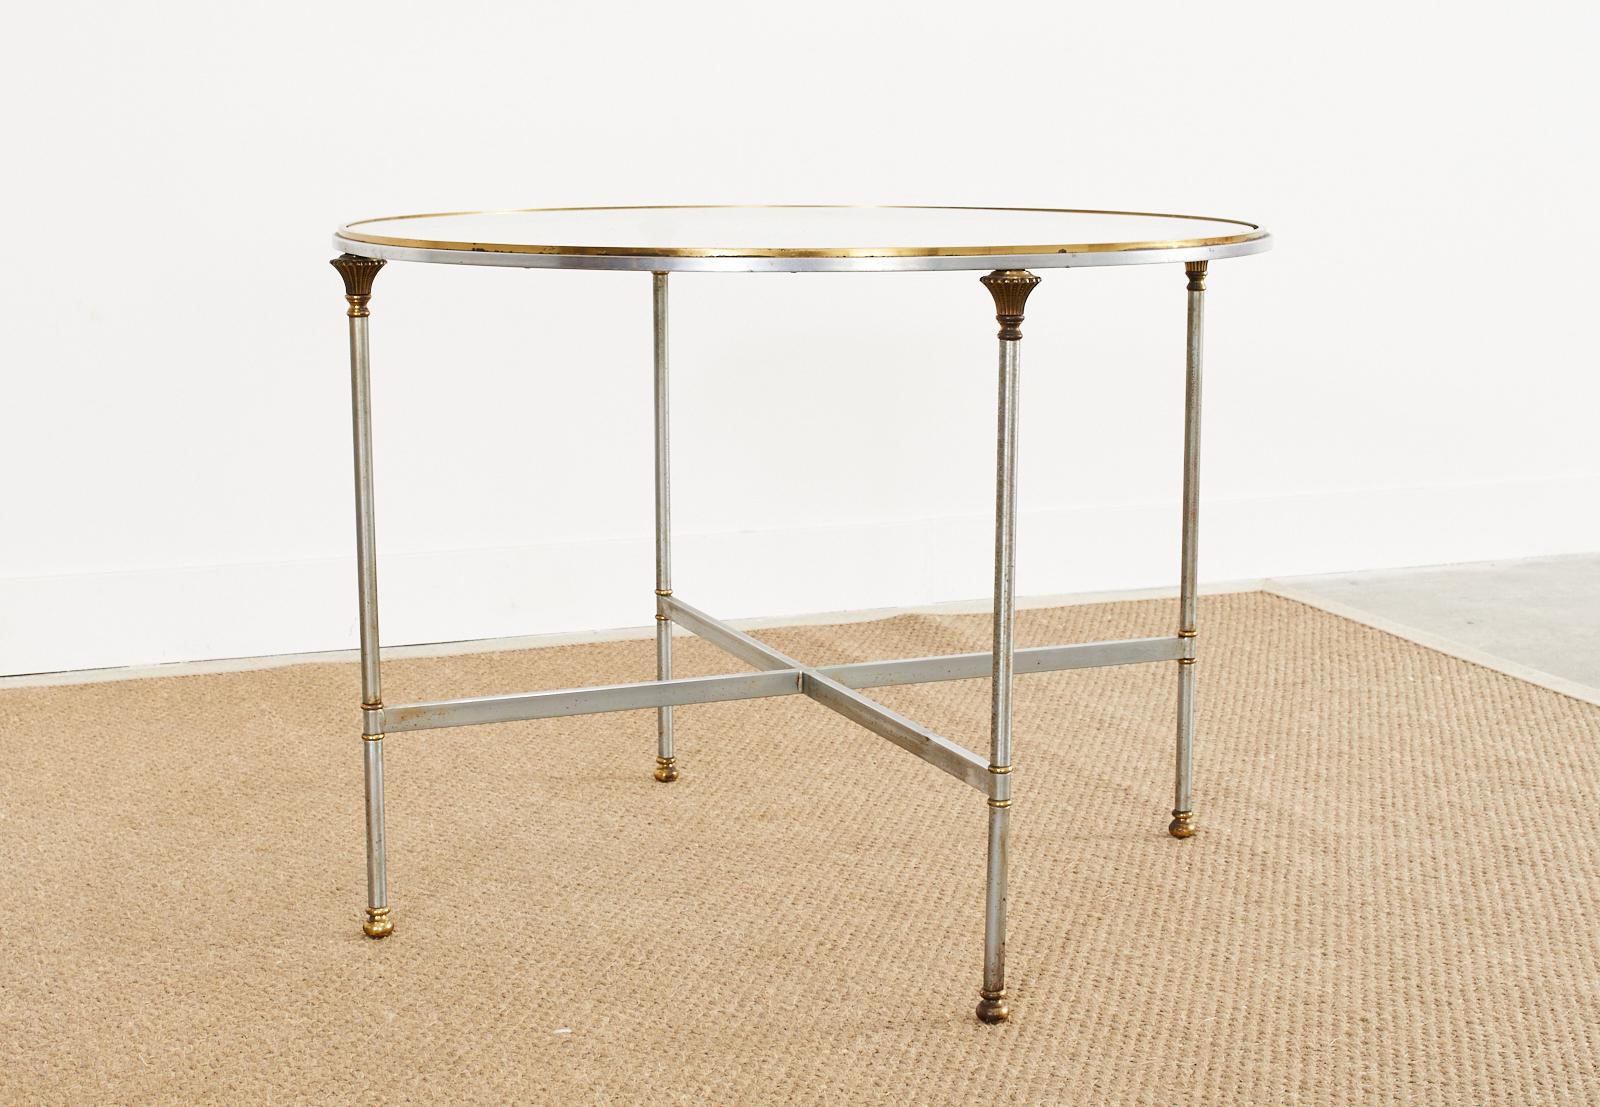 20th Century Maison Jansen Style Steel Bronze Neoclassical Center or Dining Table